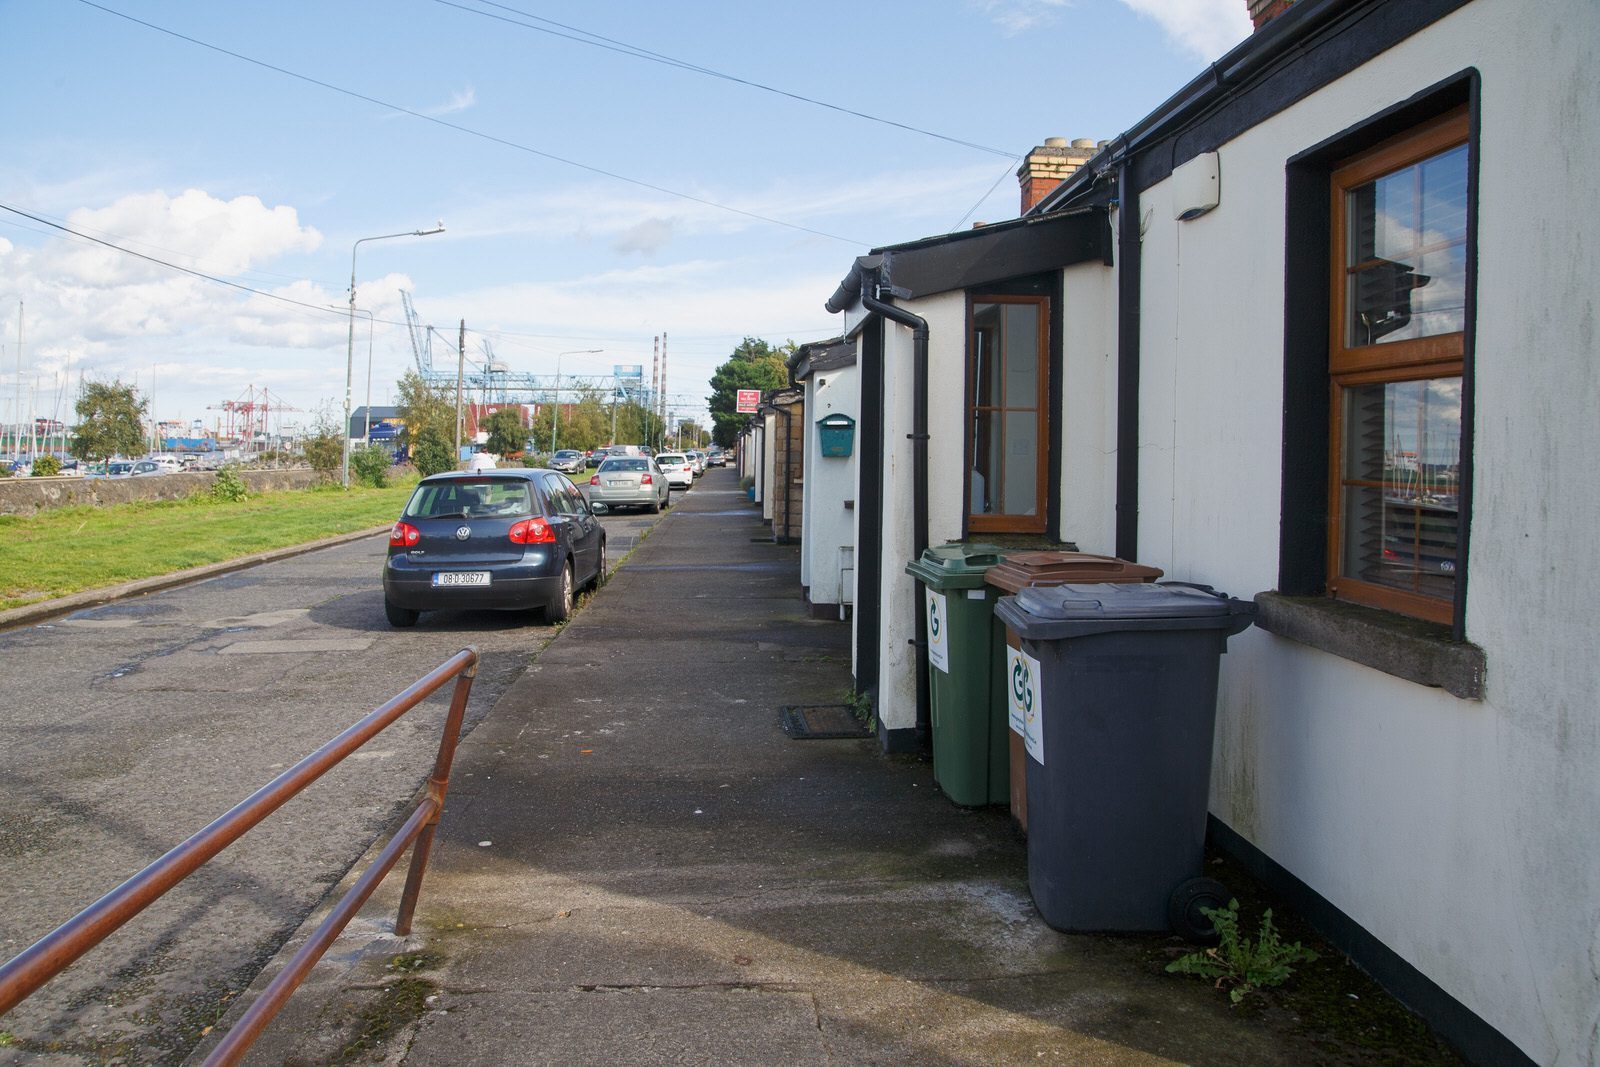 PIGEON HOUSE ROAD IN RINGSEND [IS A COMPLEX OF STREETS RATHER THAN A SINGLE STREET] 002